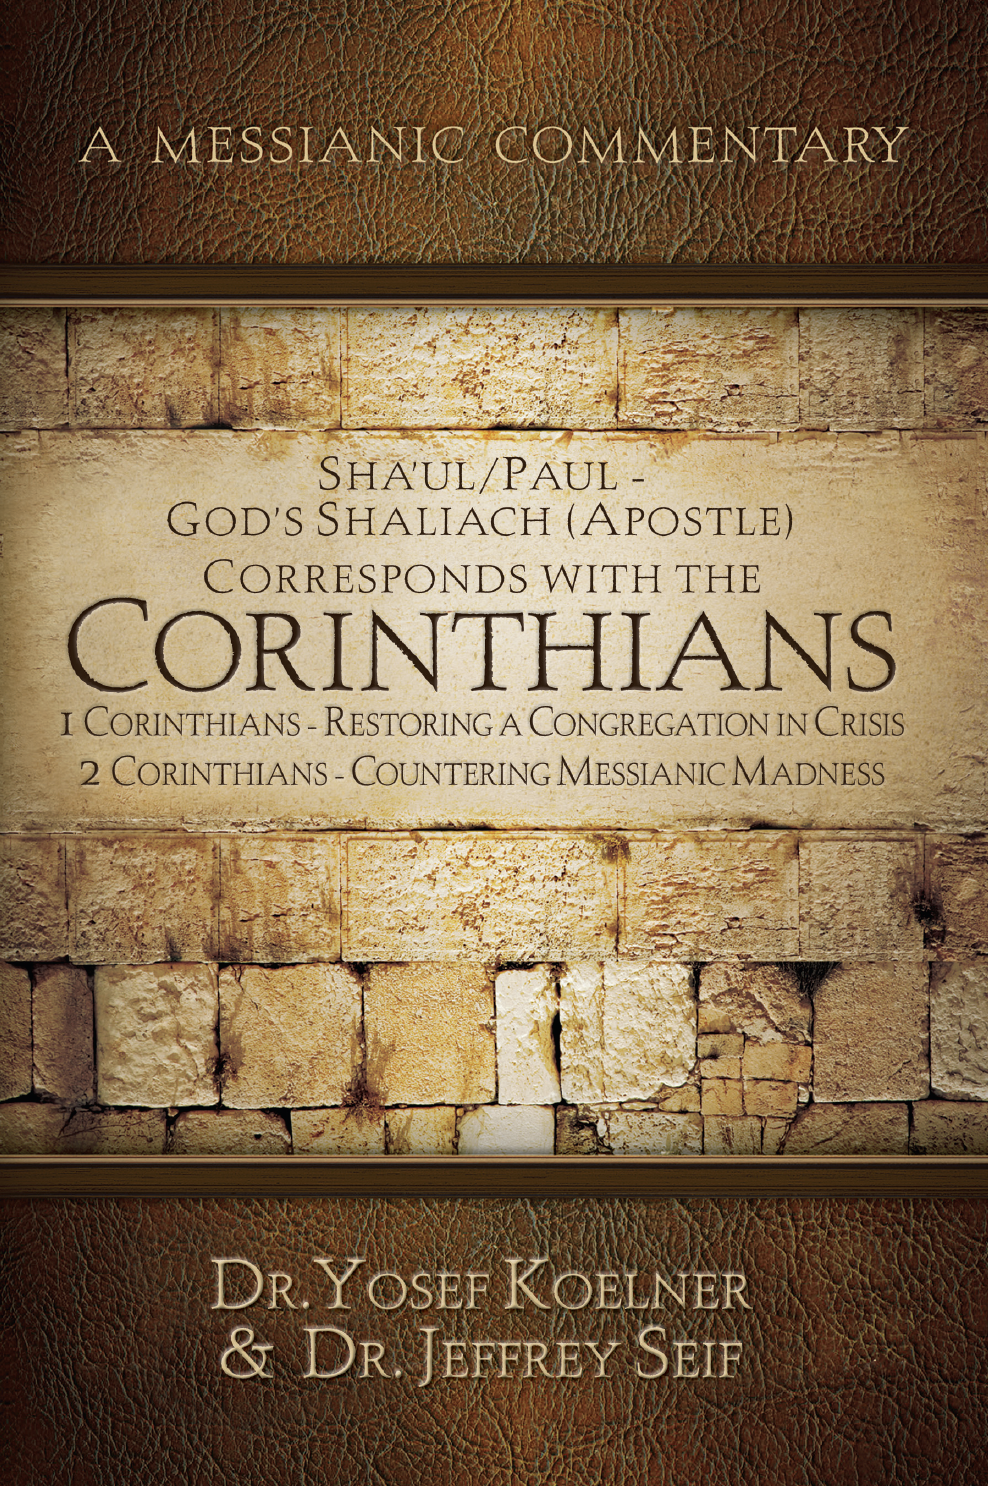 A Messianic Commentary - Sha'ul/Paul-God's Shaliach (Apostle) Corresponds with the Corinthians by Dr. Yosef Koelner and Dr. Jeffrey Seif